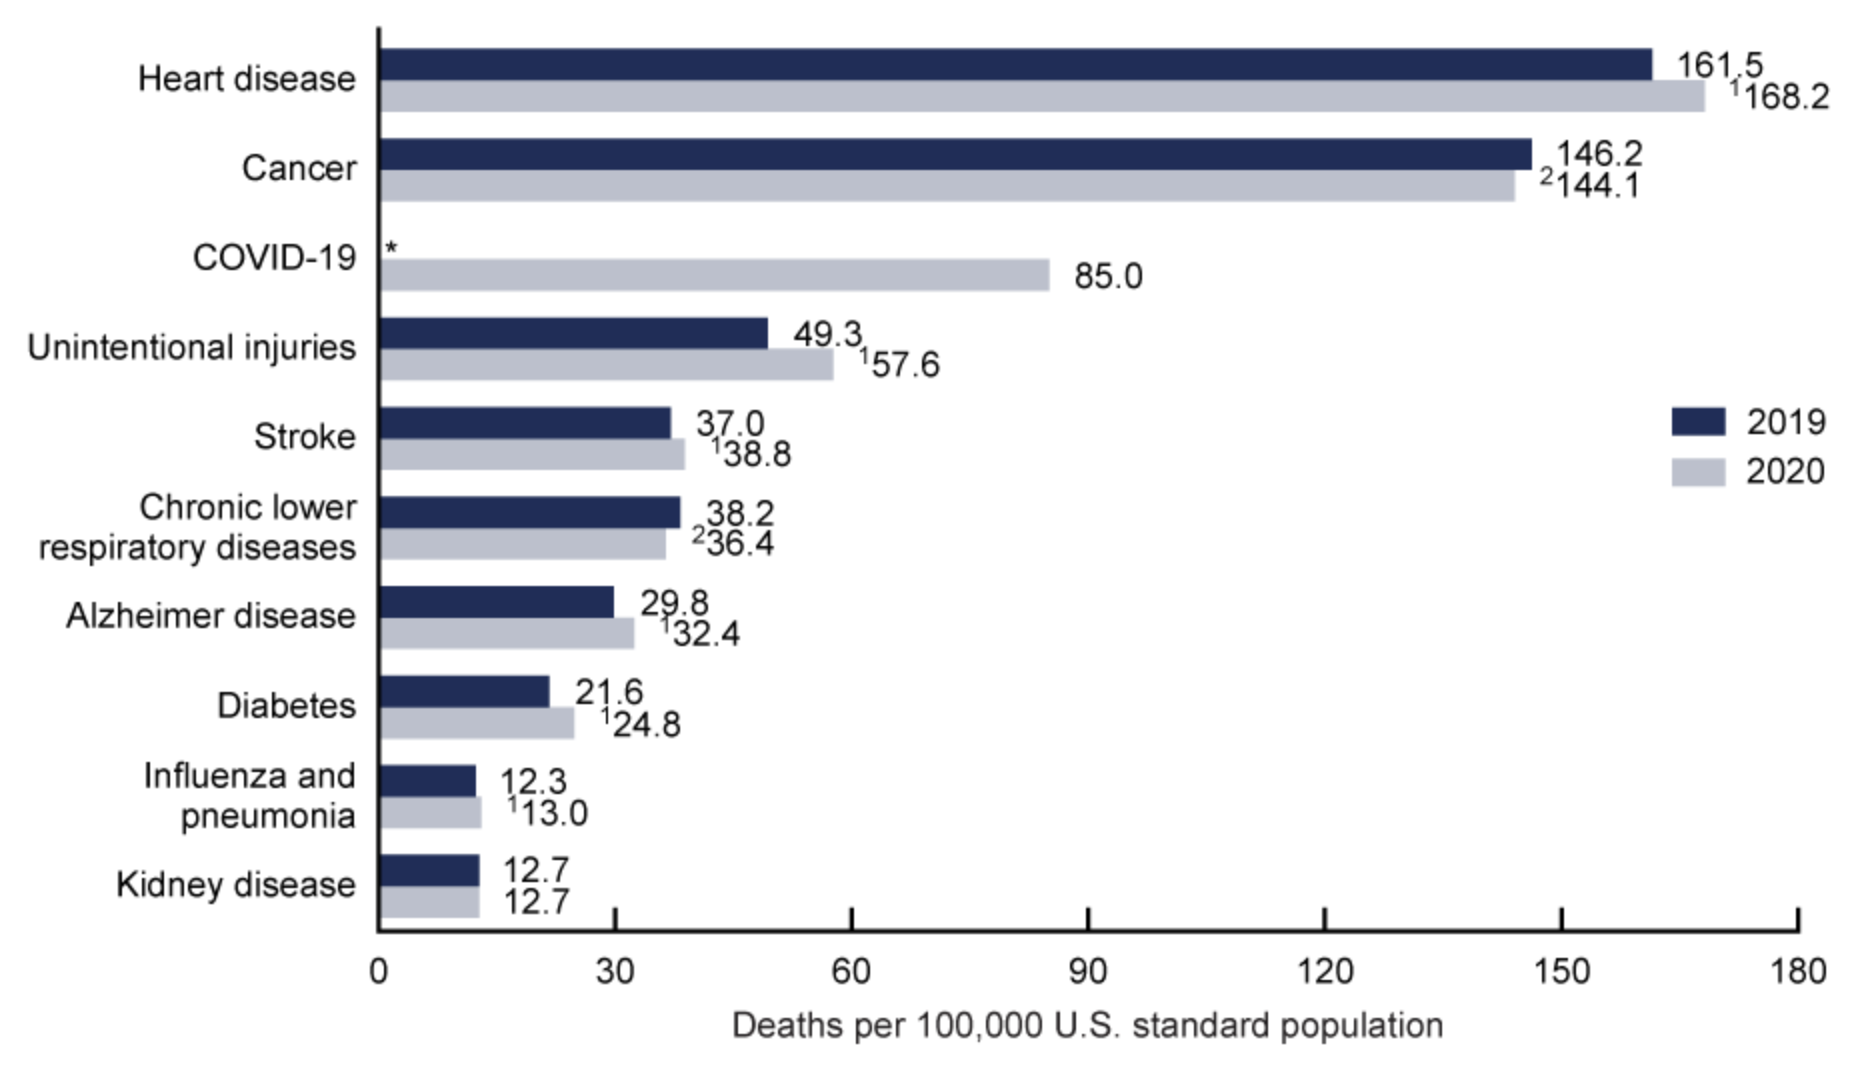 Bar graph showing the 10 leading causes of death in the United States in 2020, in descending order:  heart disease, cancer, COVID-19, unintentional injuries. stroke, chronic lower respiratory diseases, Alzheimer disease, diabetes, influenza and pneumonia, and kidney disease.